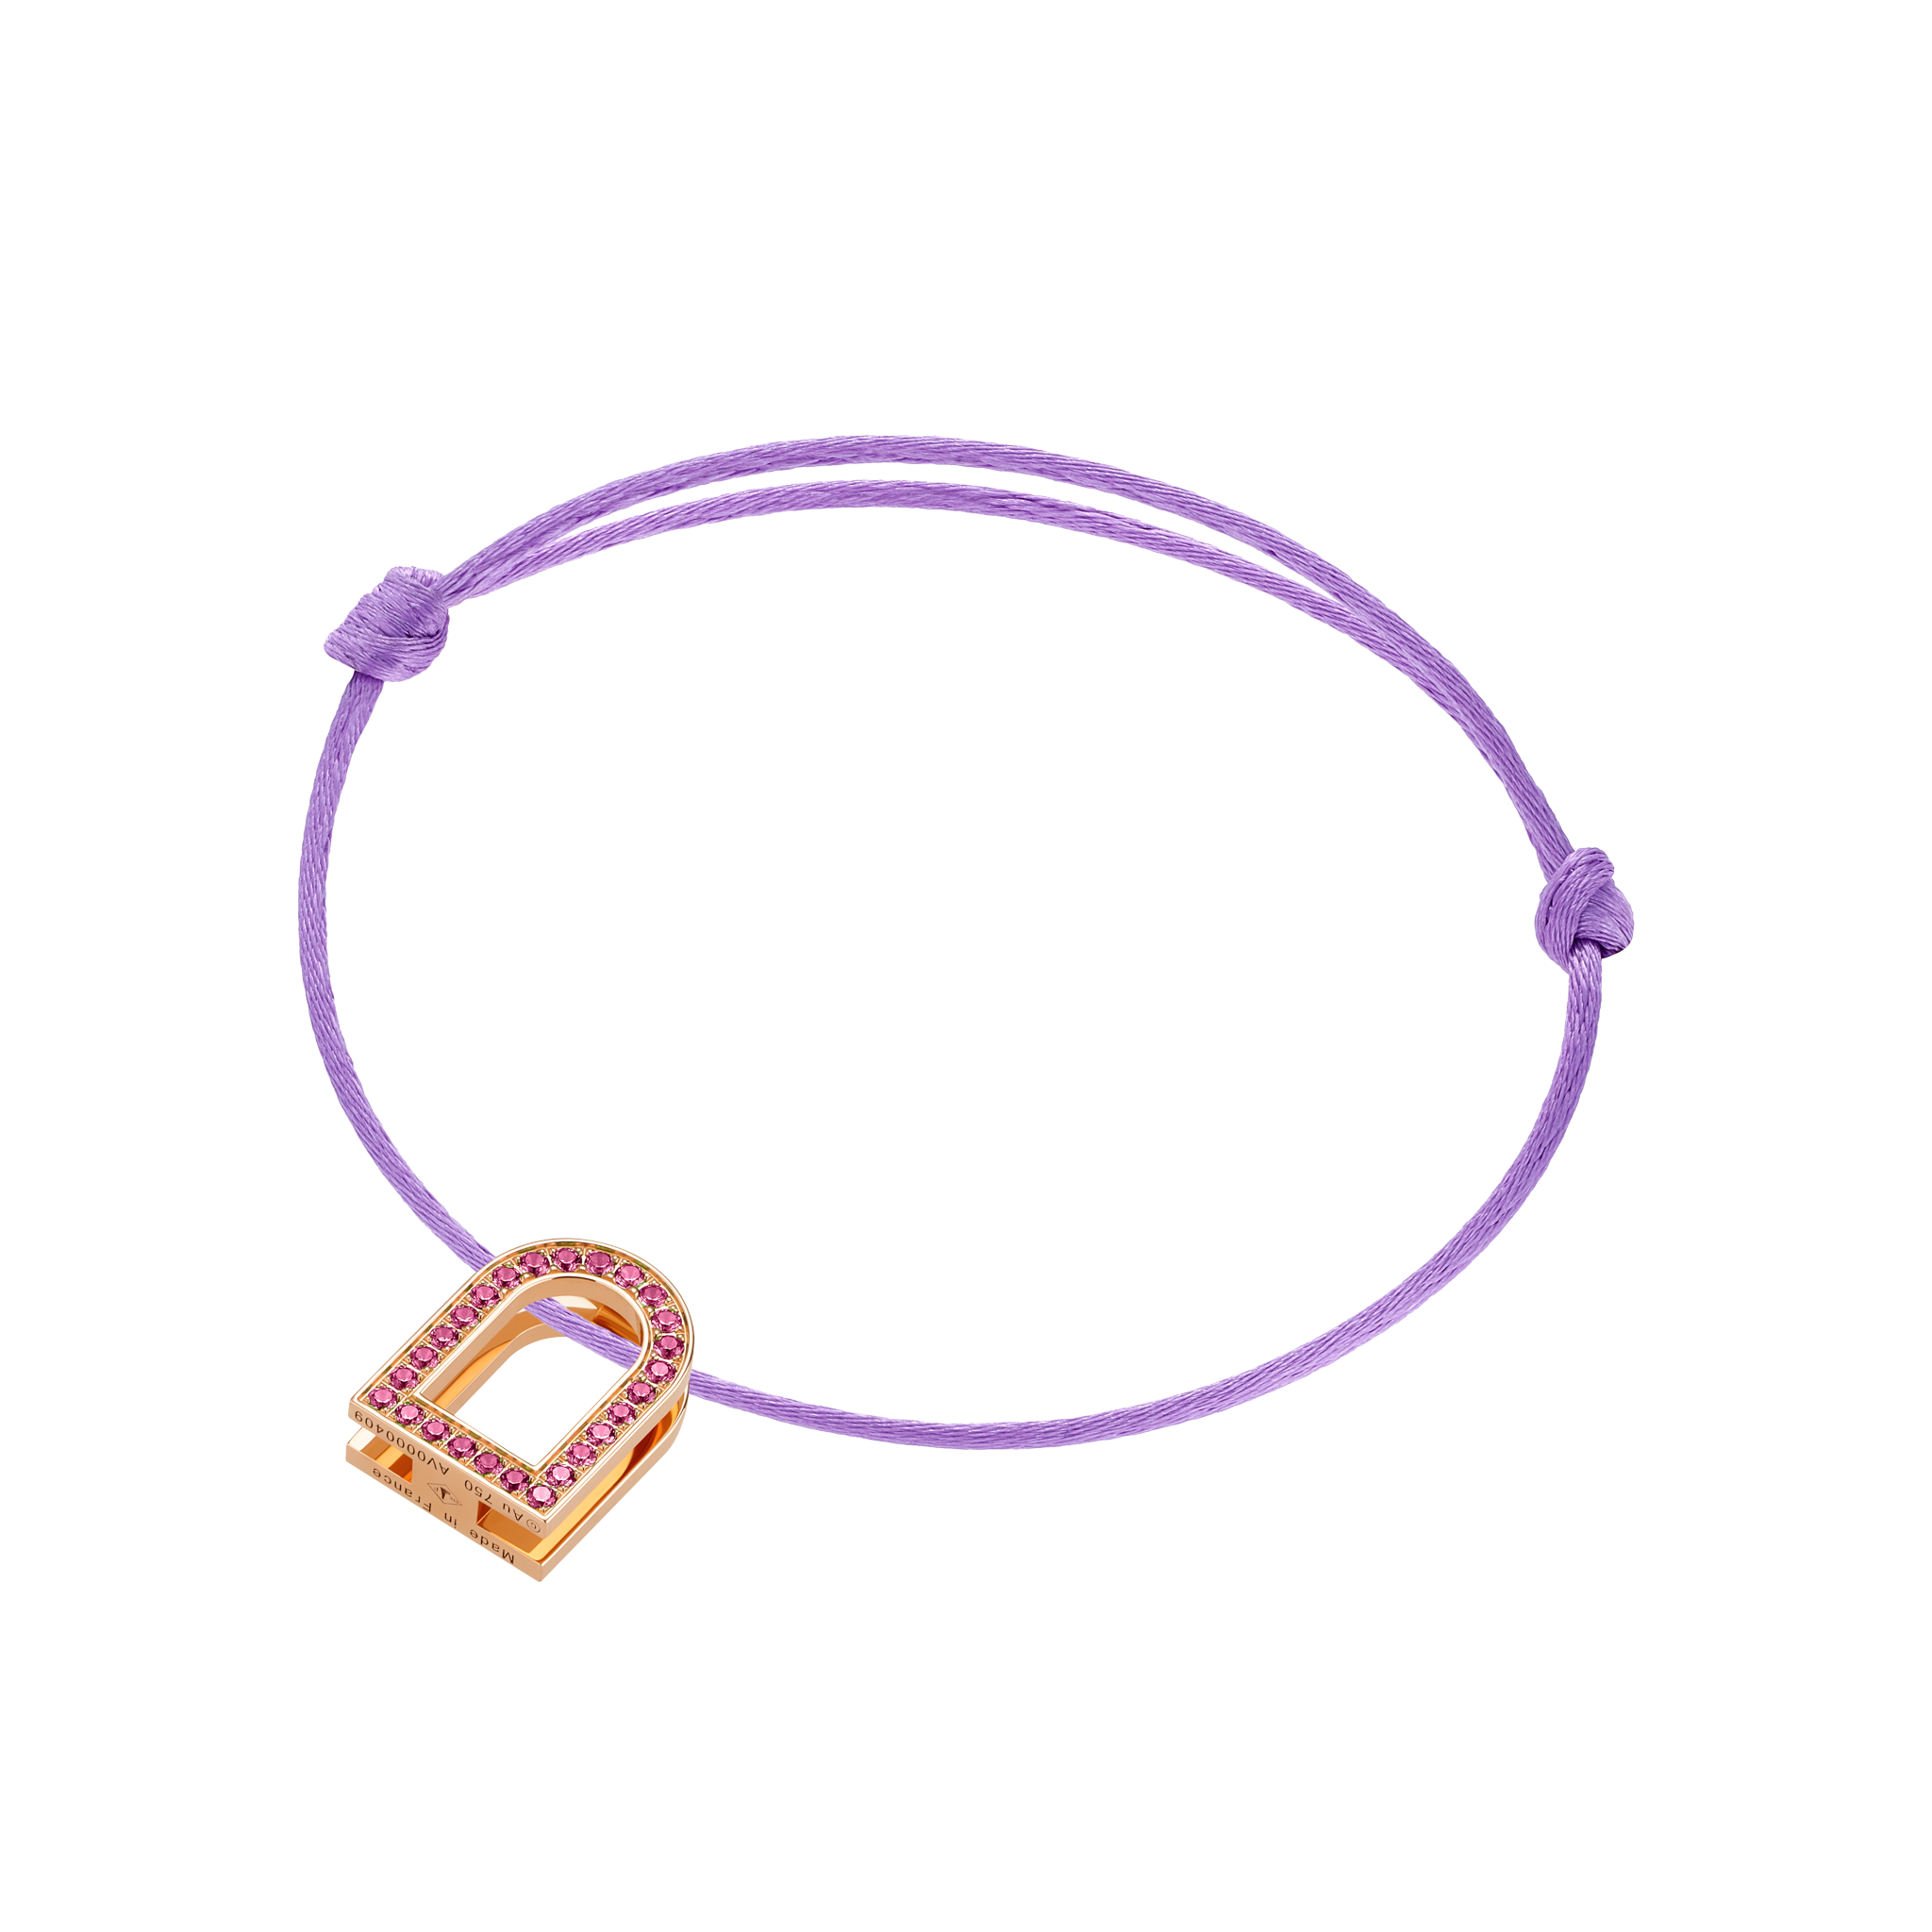 L’Arc Voyage Charm MM, 18k Rose Gold with Galerie Pink Sapphires on Silk Cord